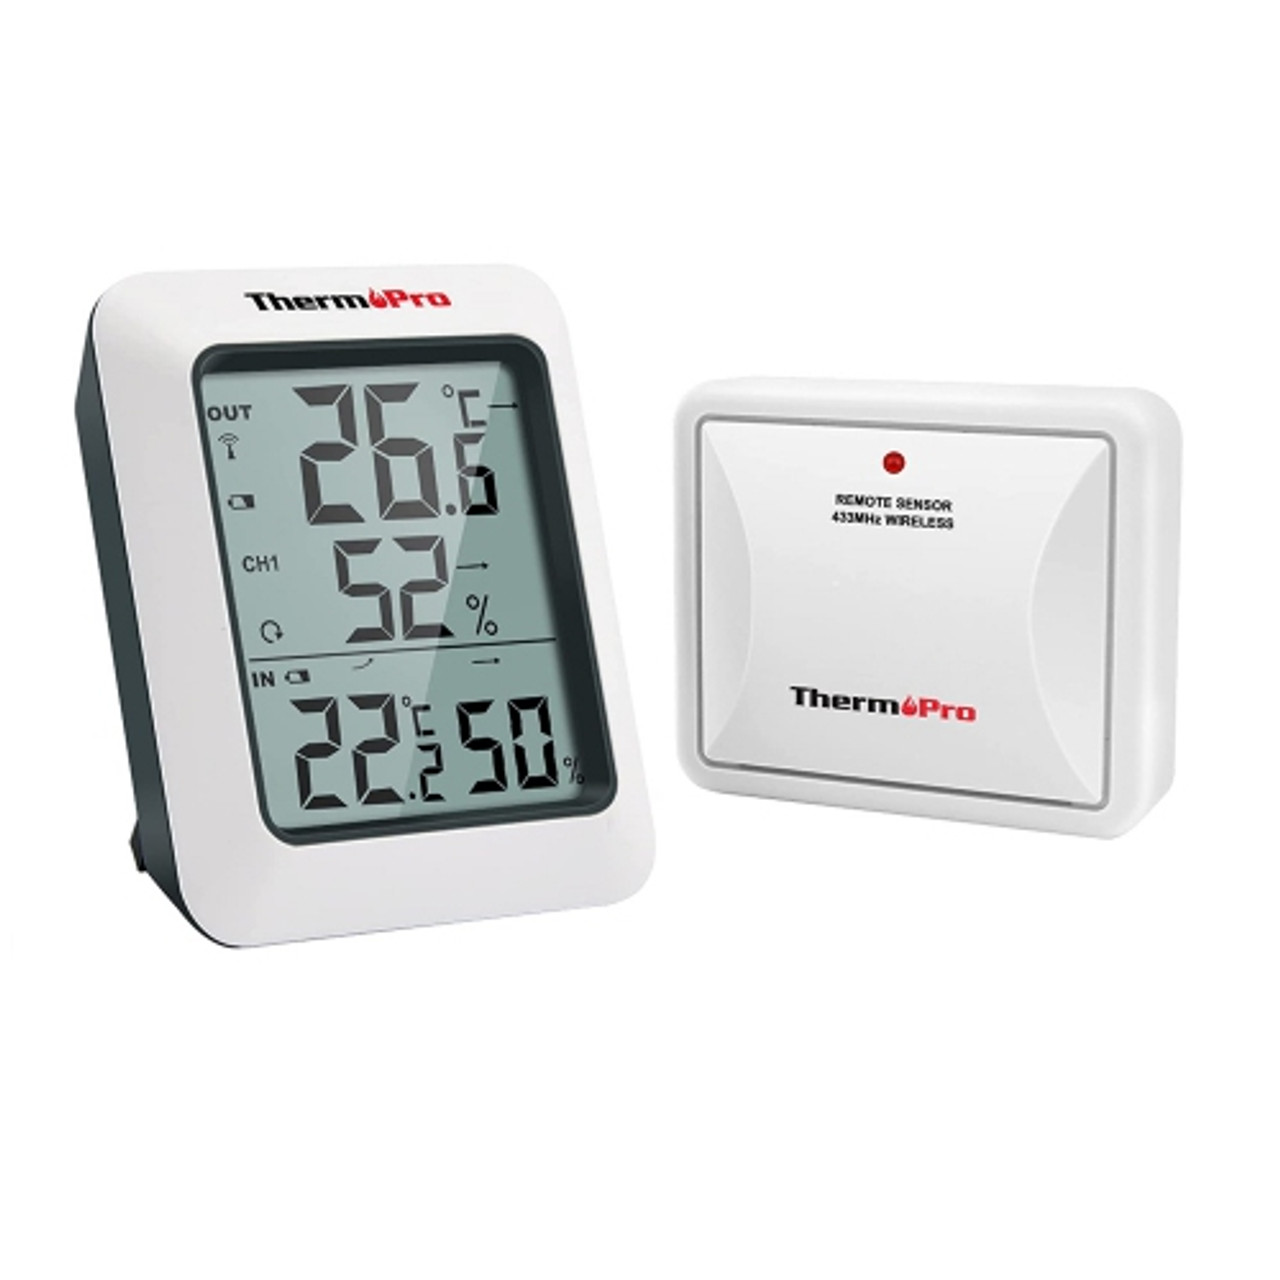 Indoor & Outdoor Thermometer with Hygrometer